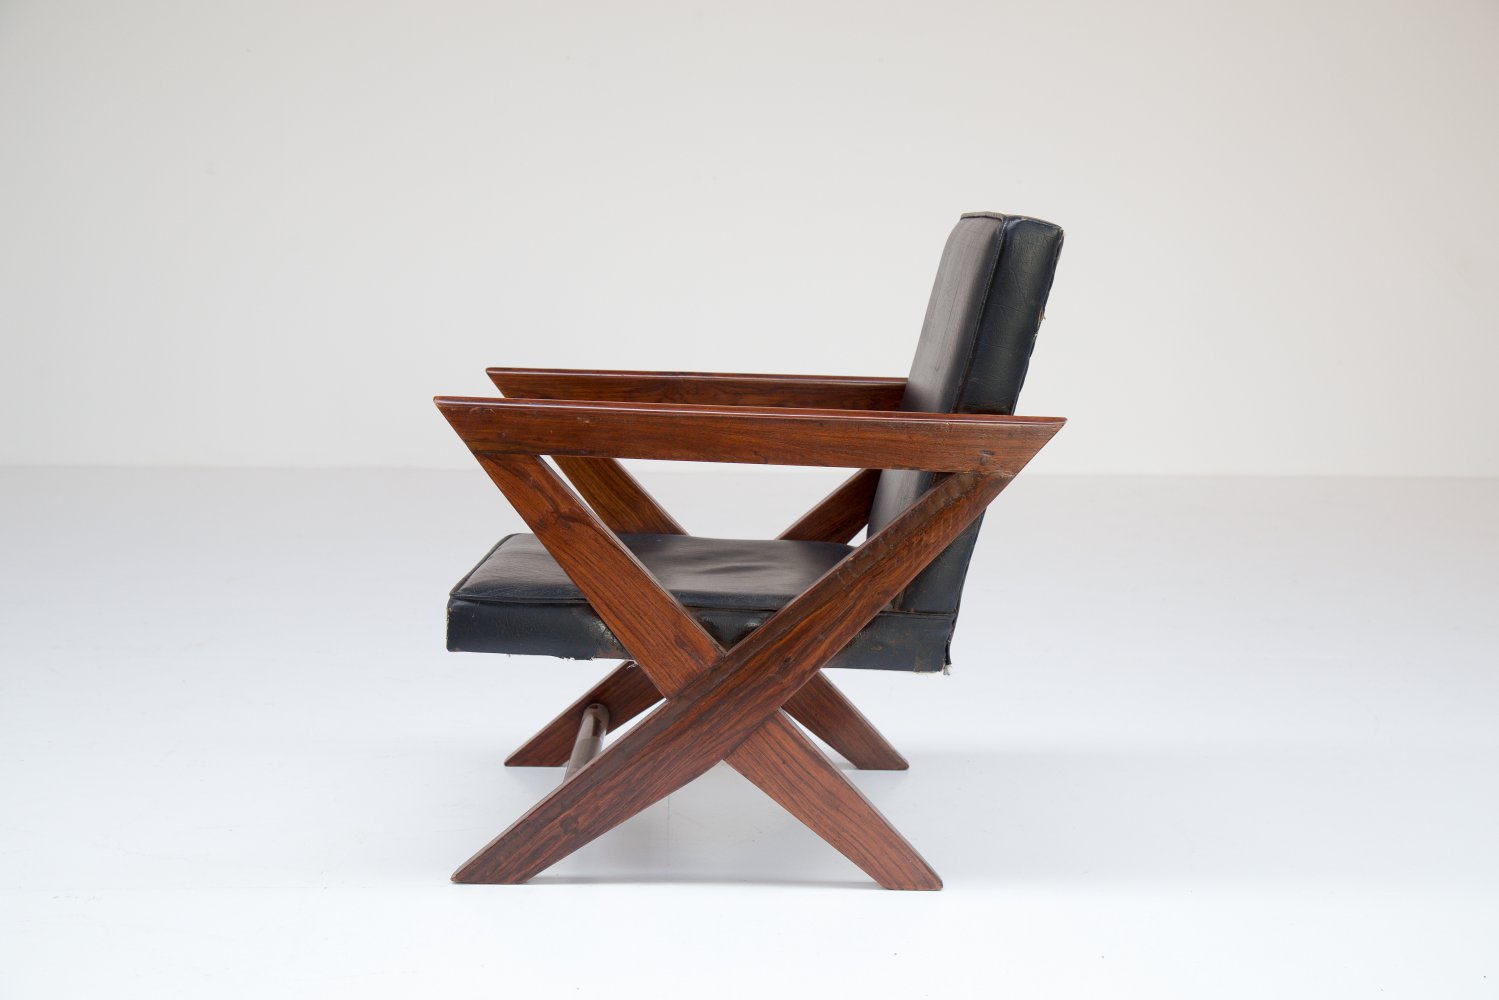 Pierre Jeanneret Lounge chair from M.L.A Flats building in Chandigarh 